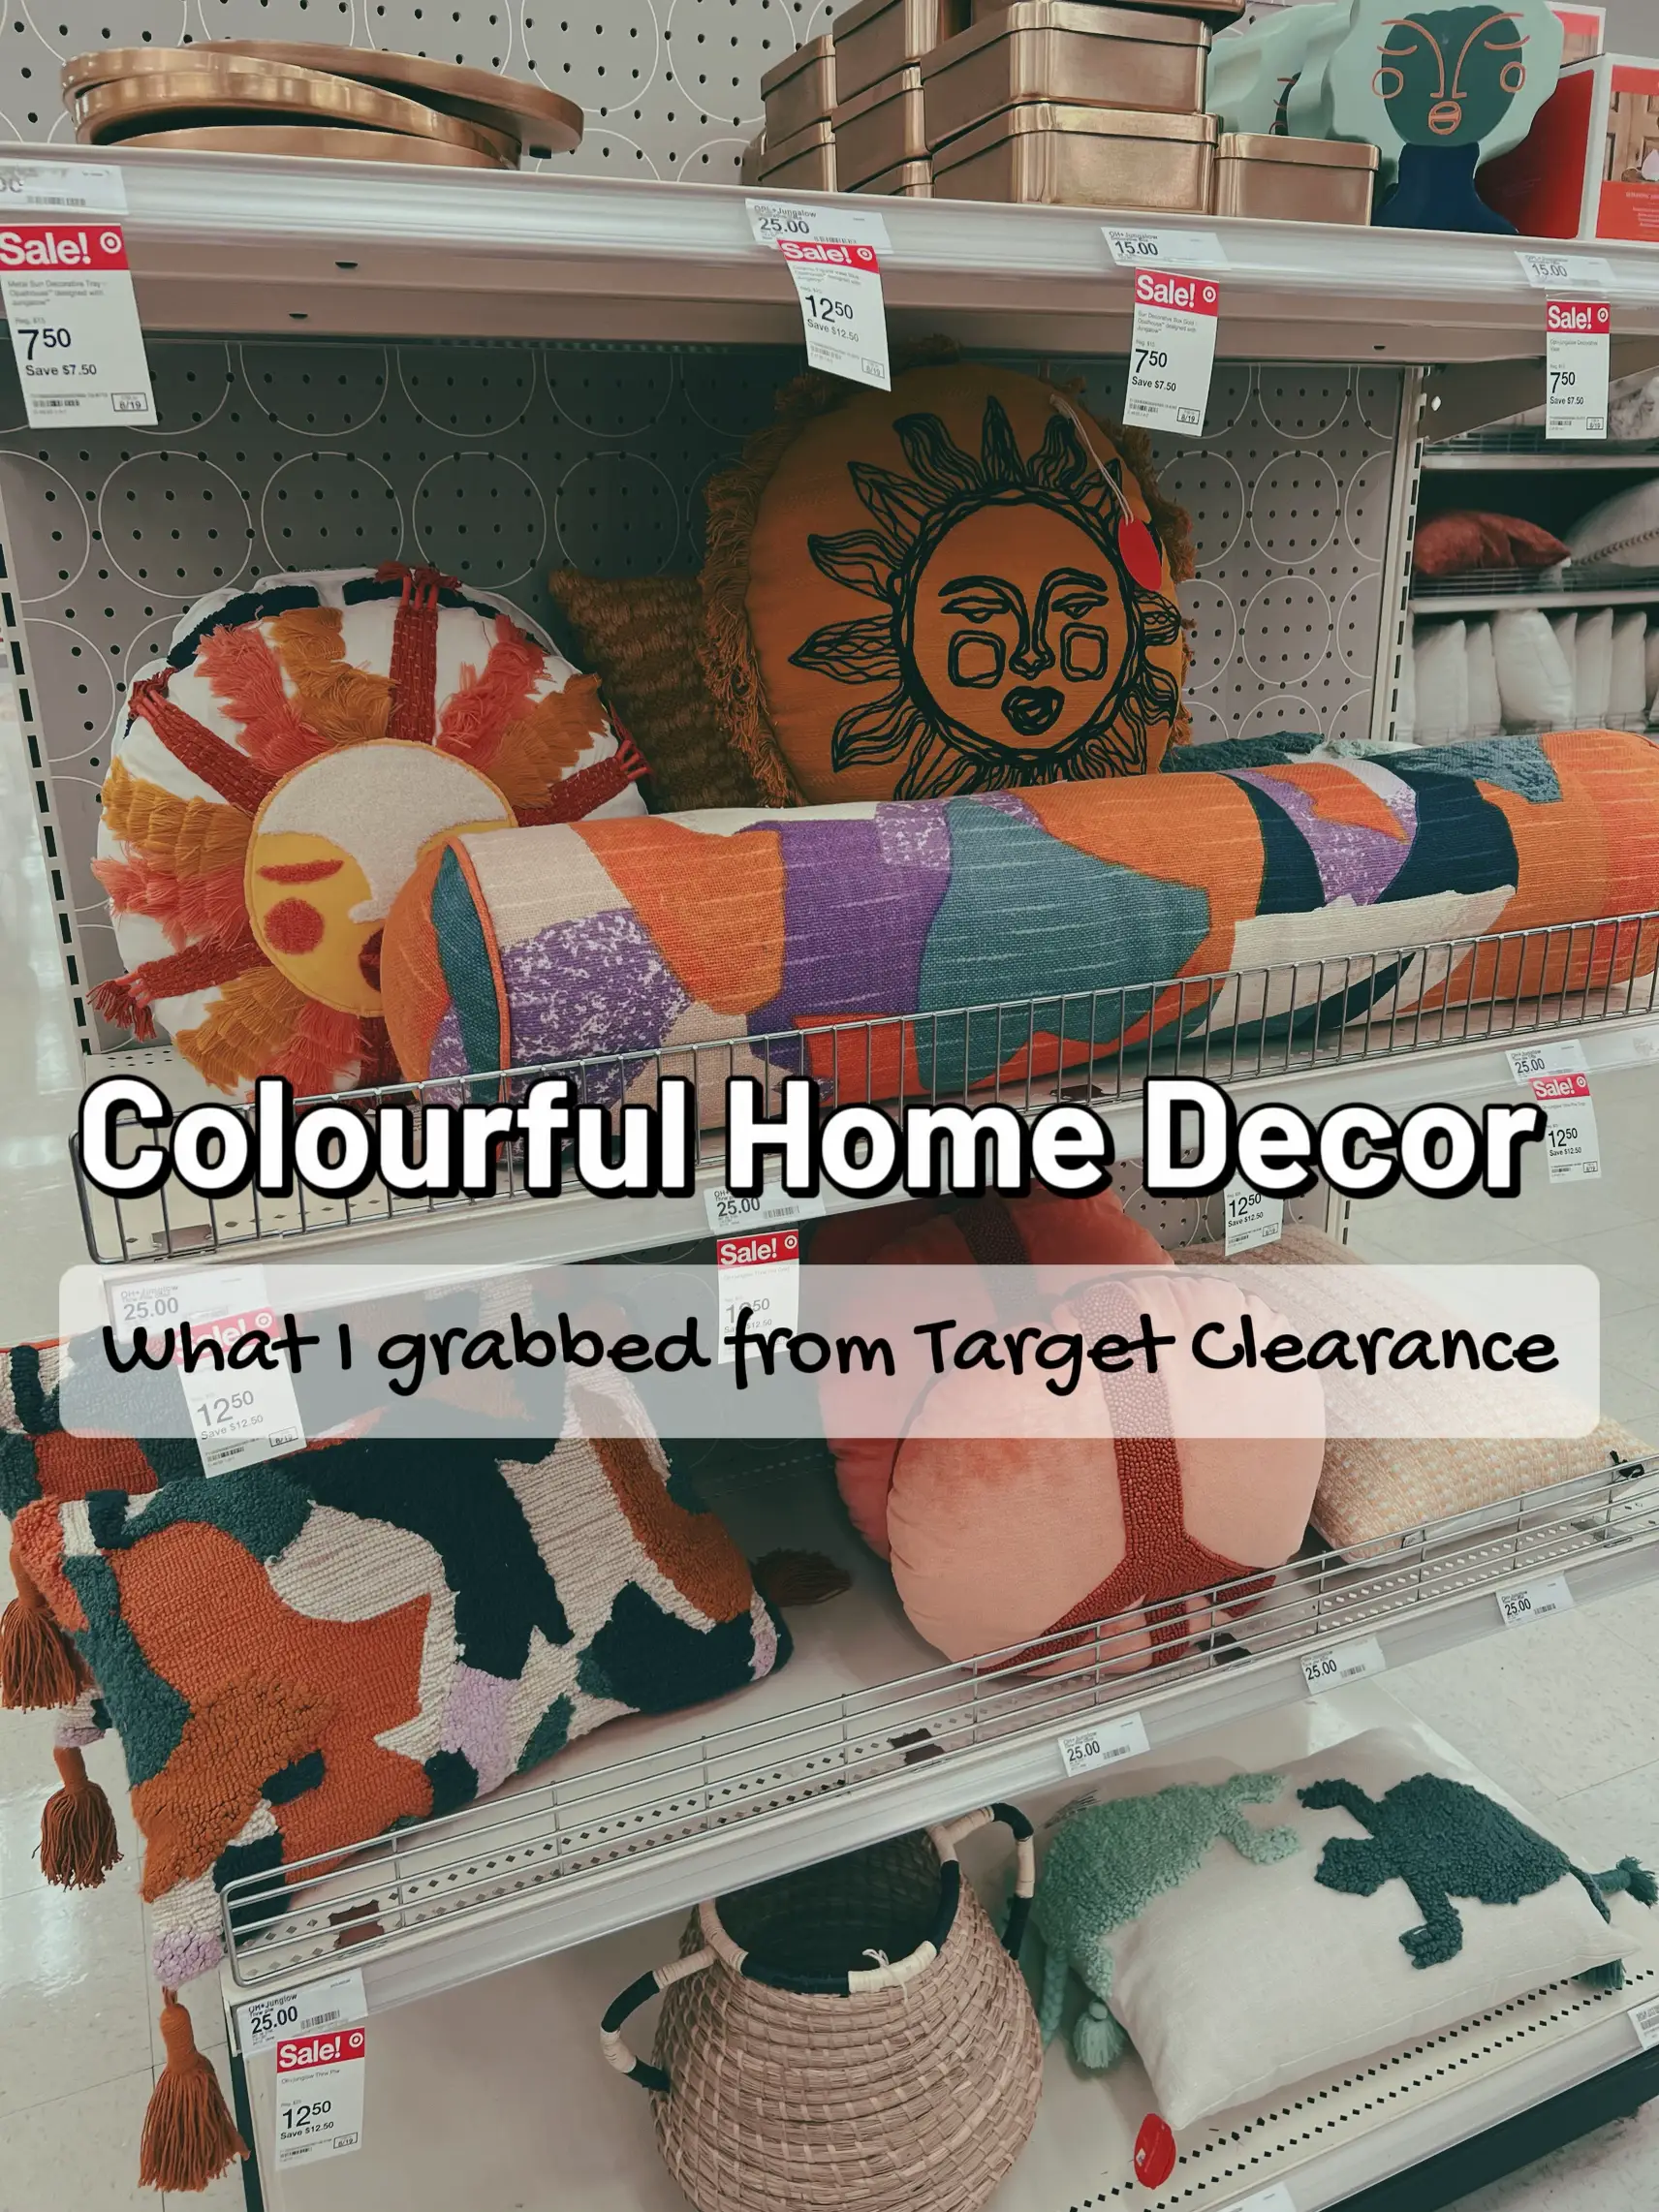 New Home Decor from Target, Gallery posted by Nicole_jordy